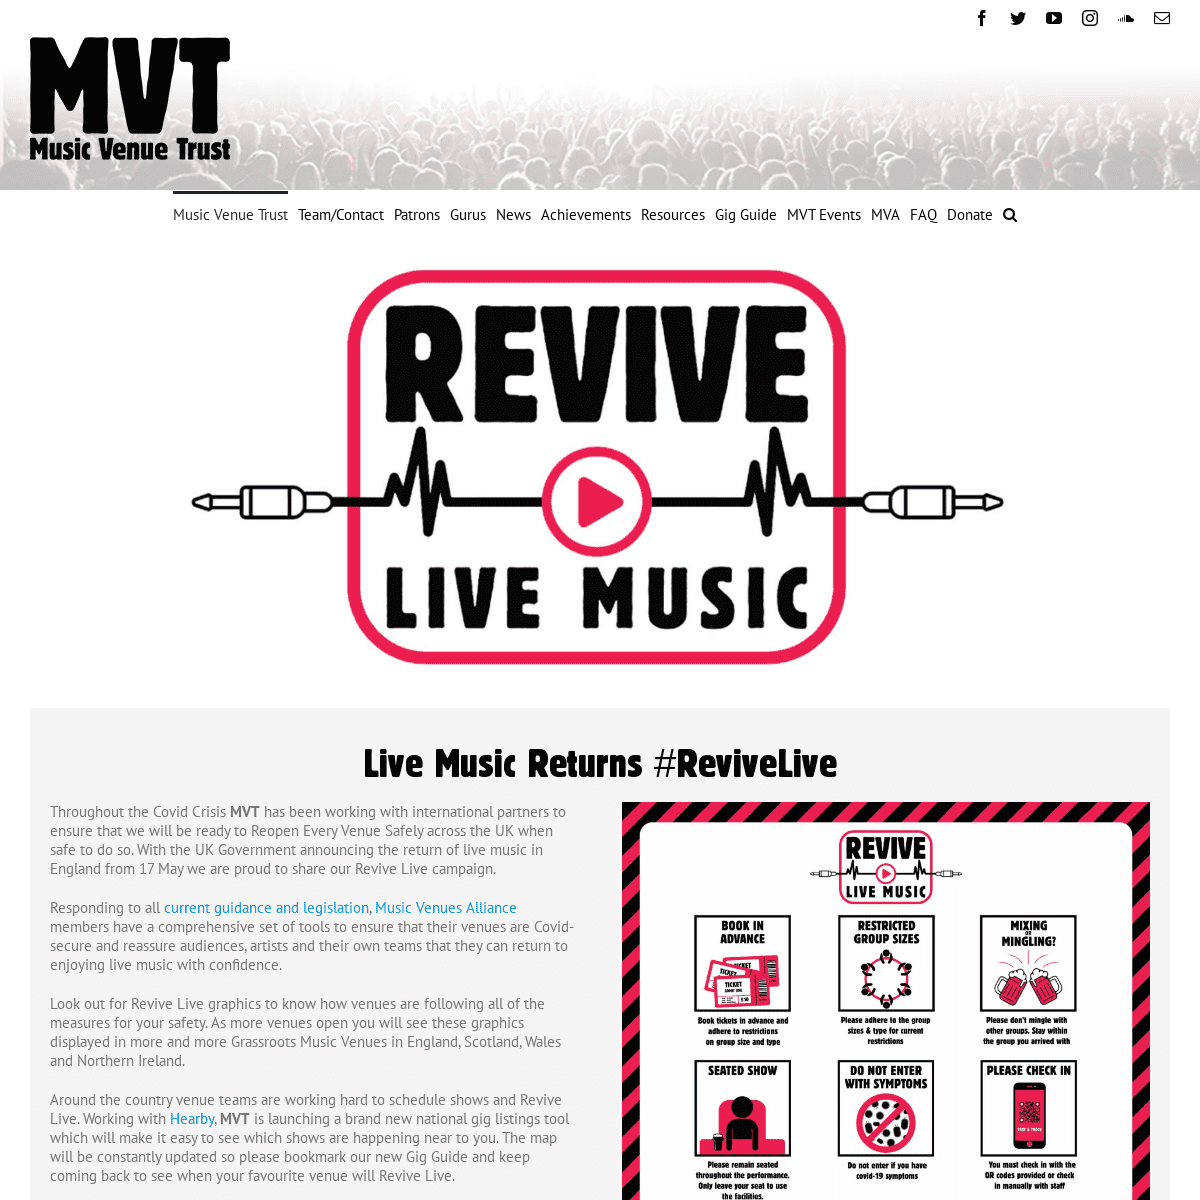 A complete backup of https://musicvenuetrust.com